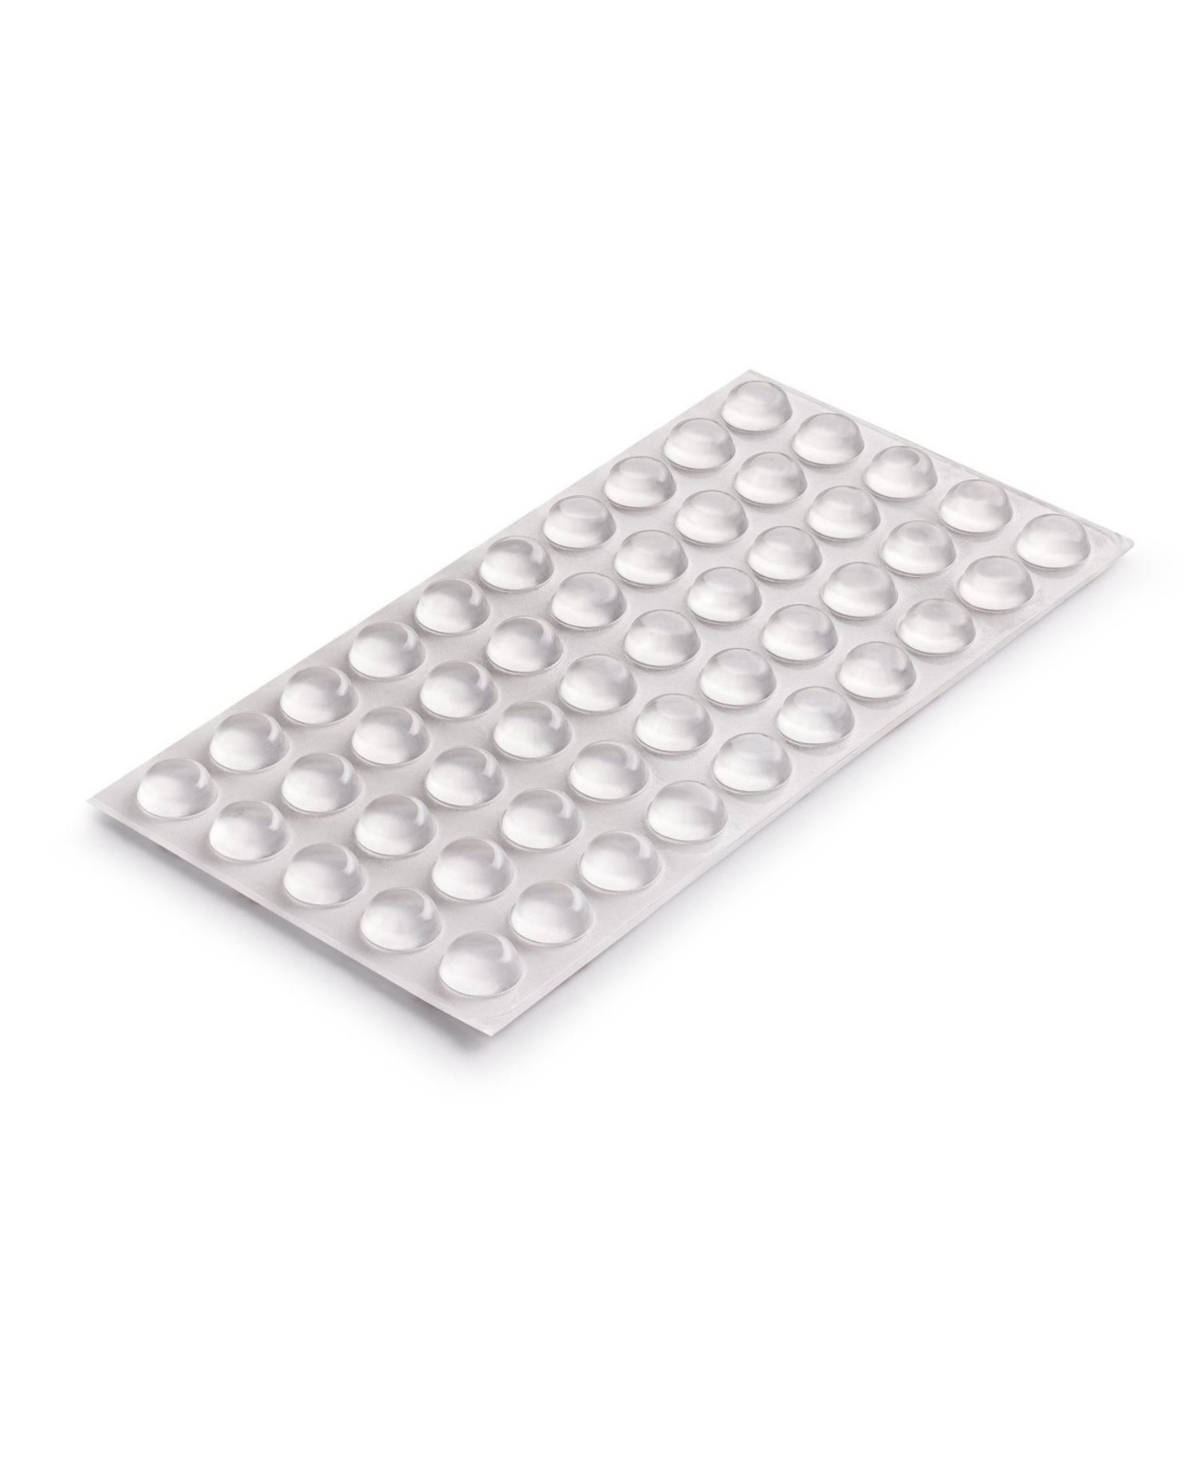 Cabinet Bumpers Clear Adhesive Pads 50-Pc